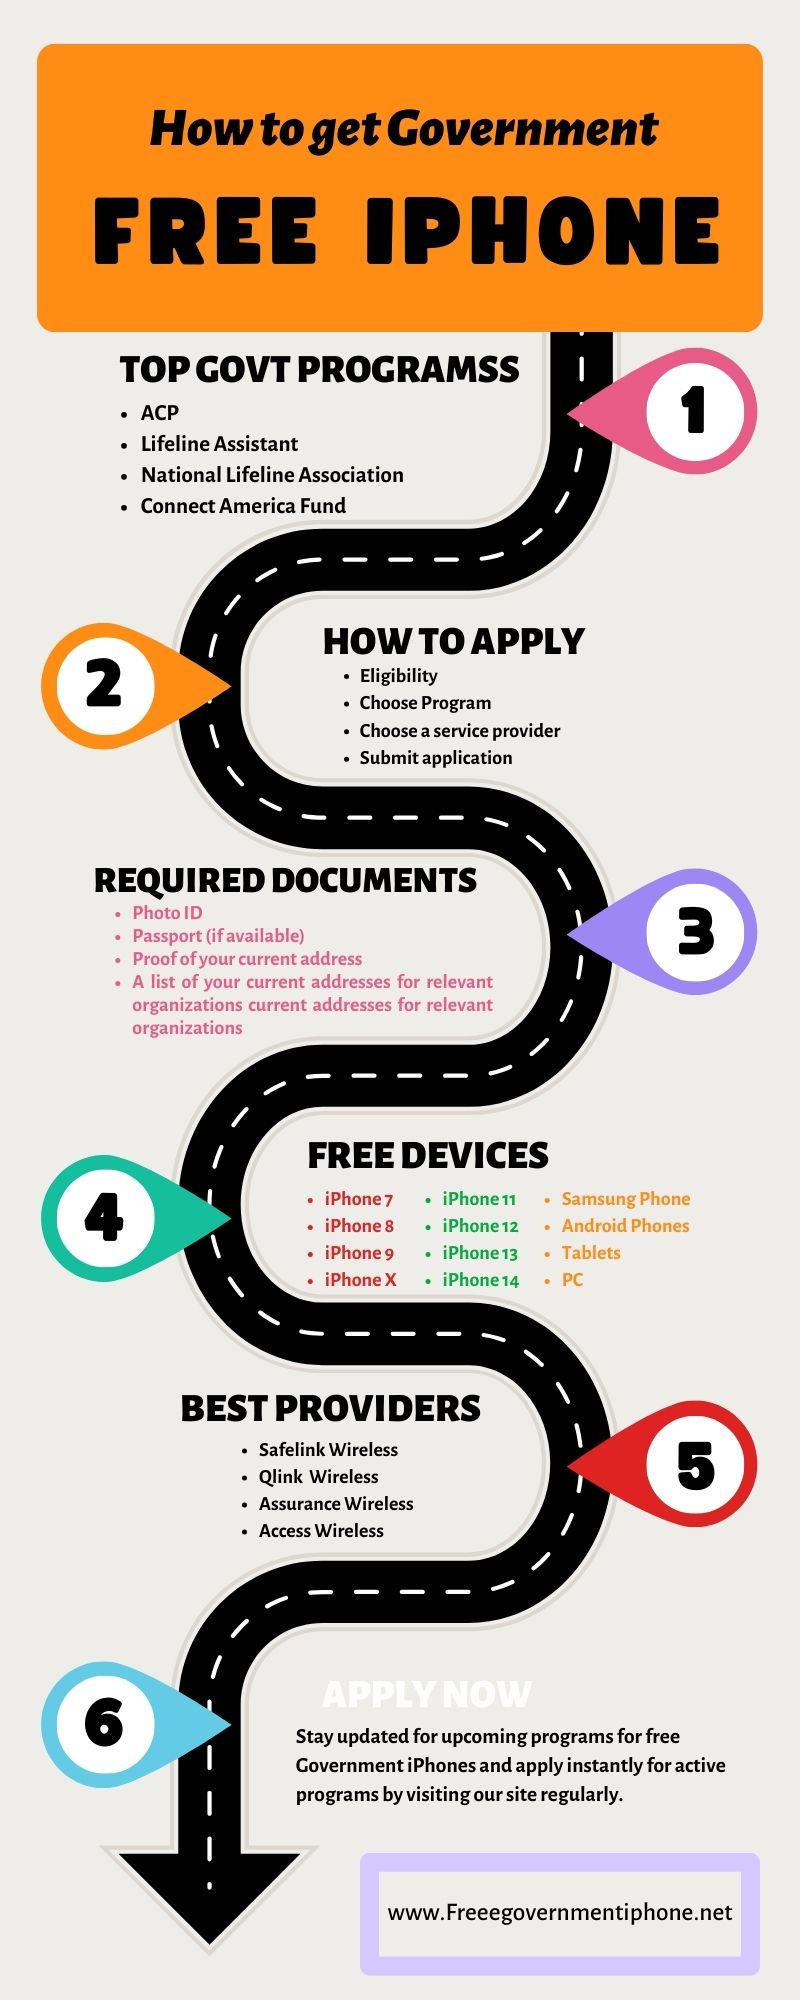 How to get free government iphone infographic